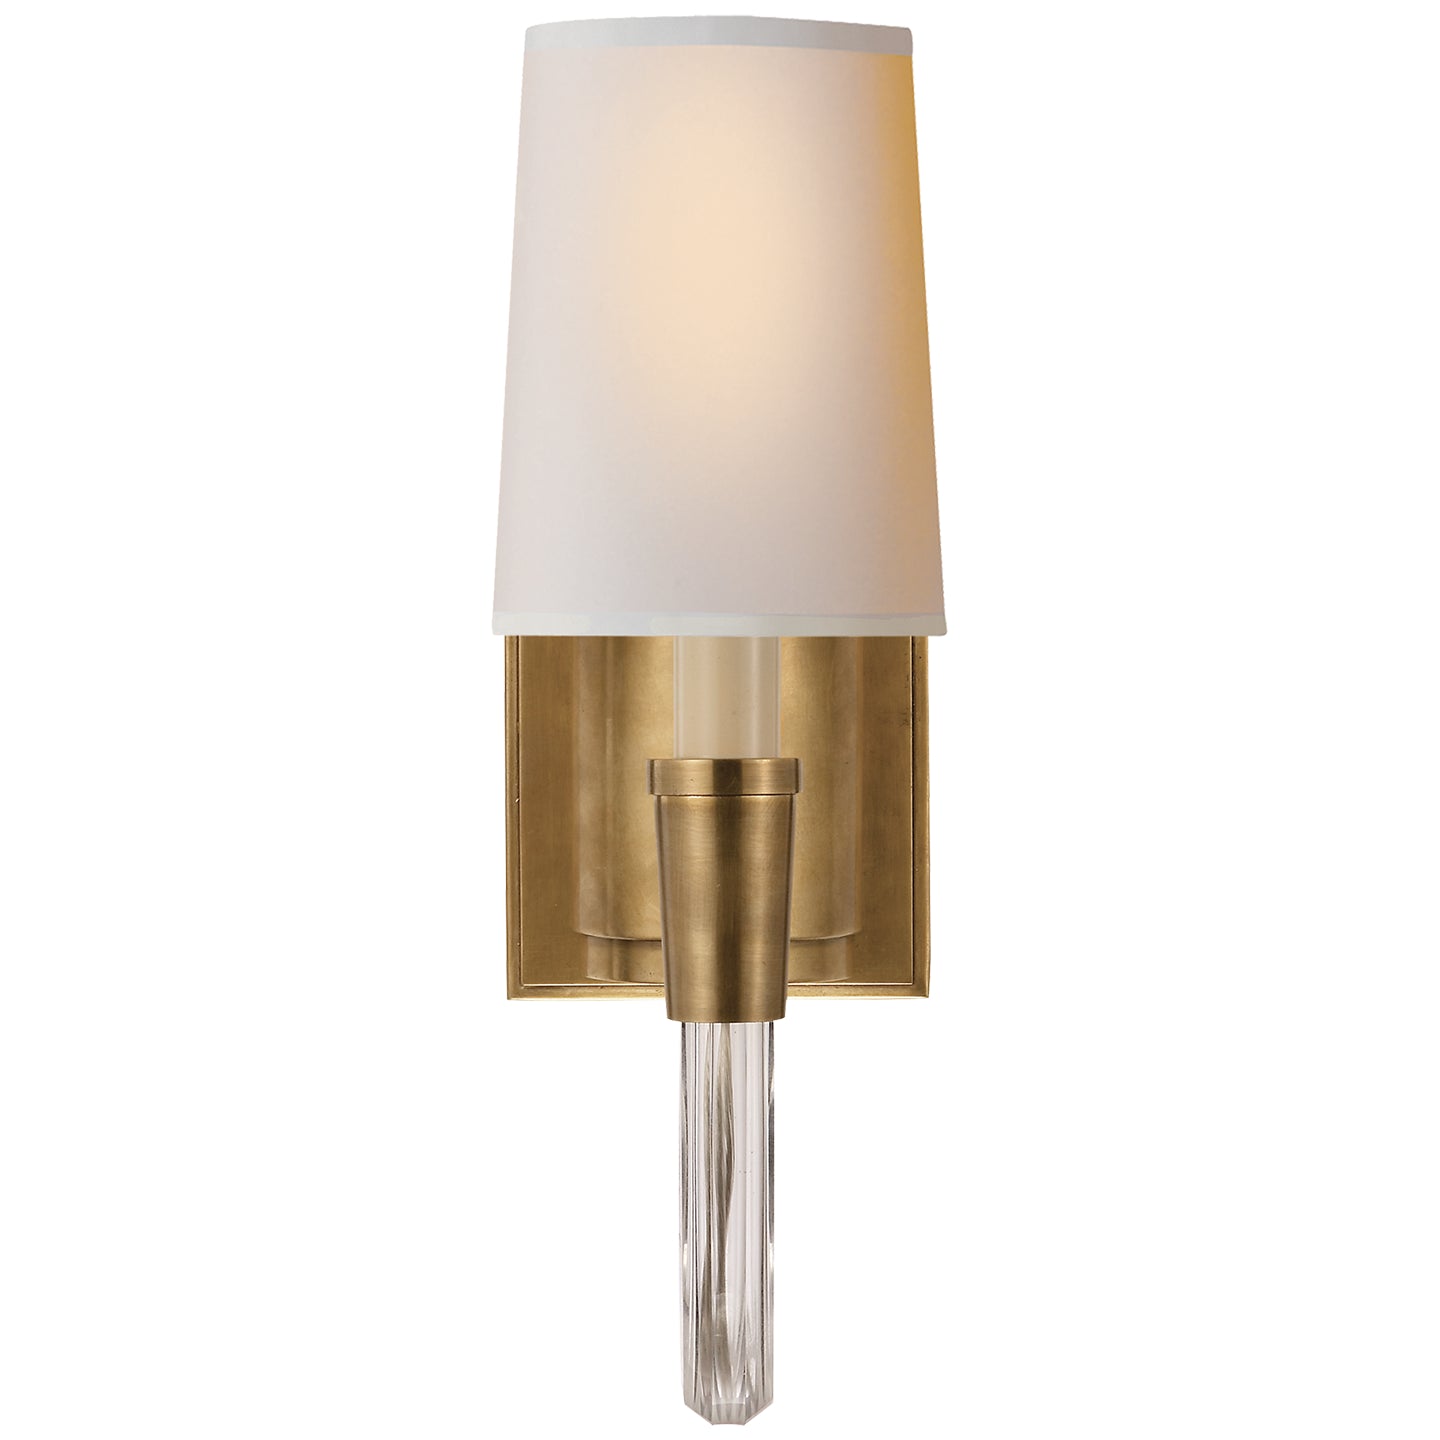 Visual Comfort Signature - TOB 2032HAB-NP - One Light Wall Sconce - Vivian - Hand-Rubbed Antique Brass